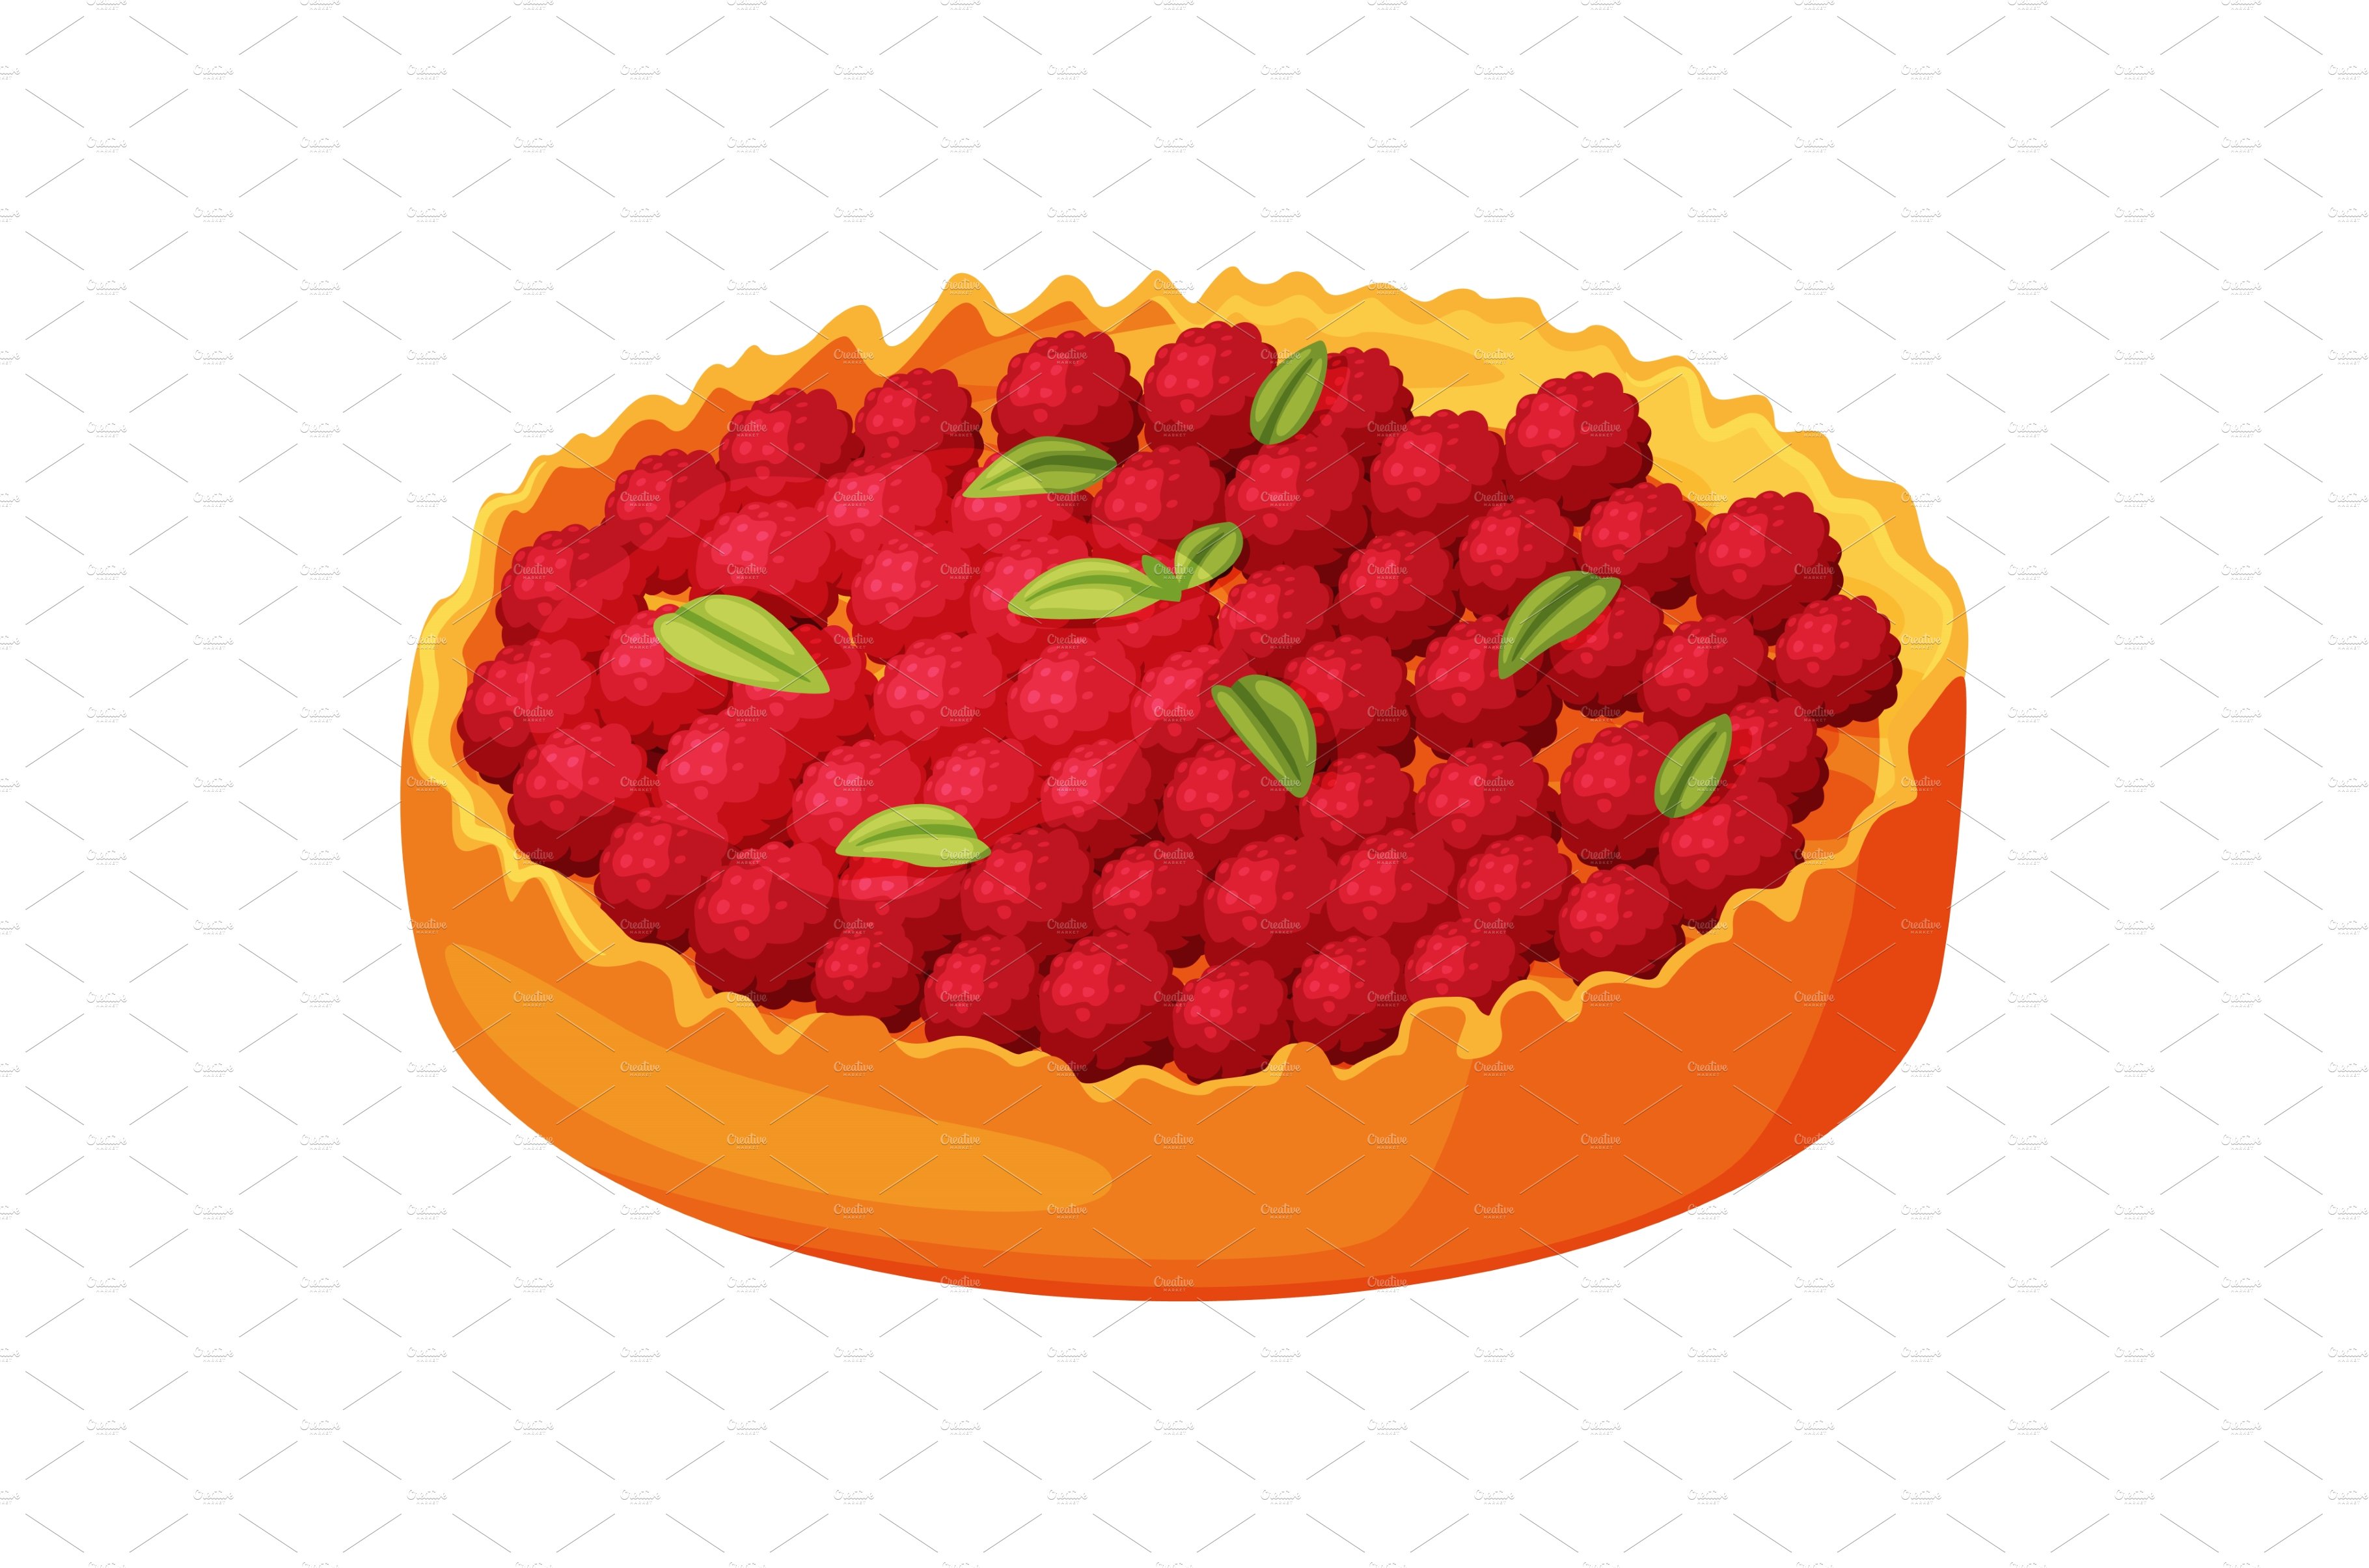 Baked Raspberry Pie Made from cover image.